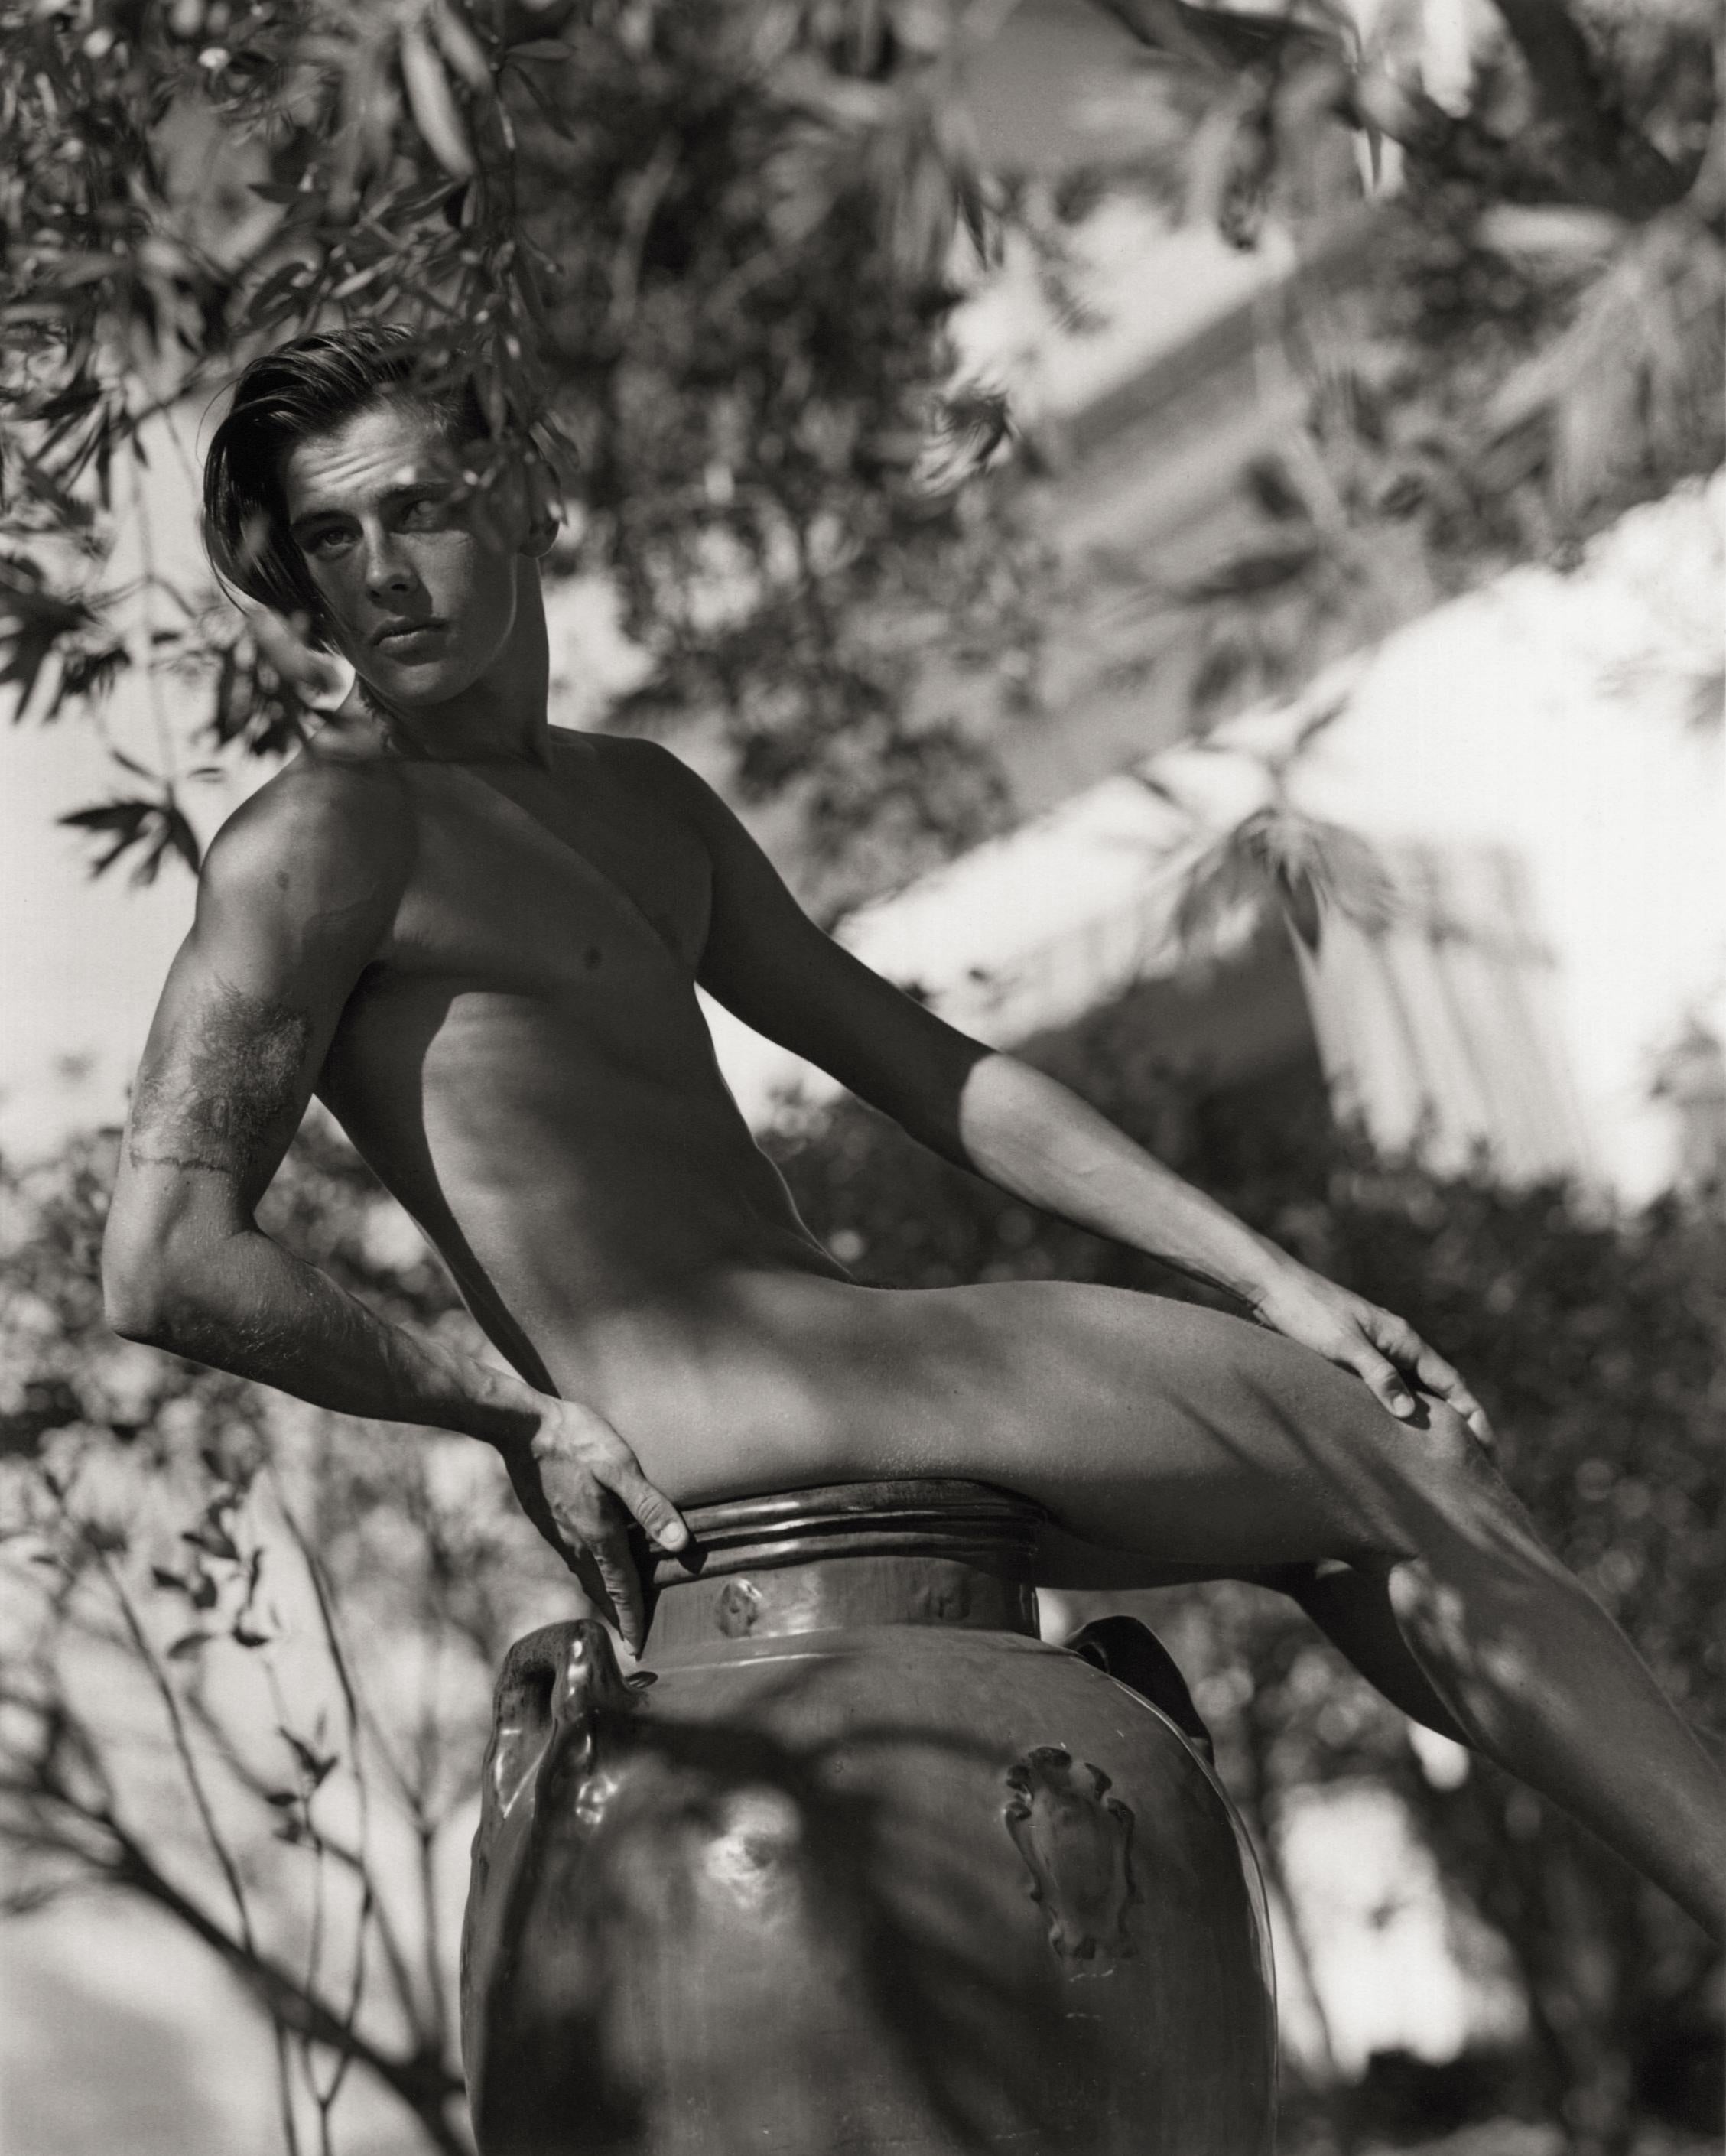 Werner, Montecito, California - Photograph by Bruce Weber